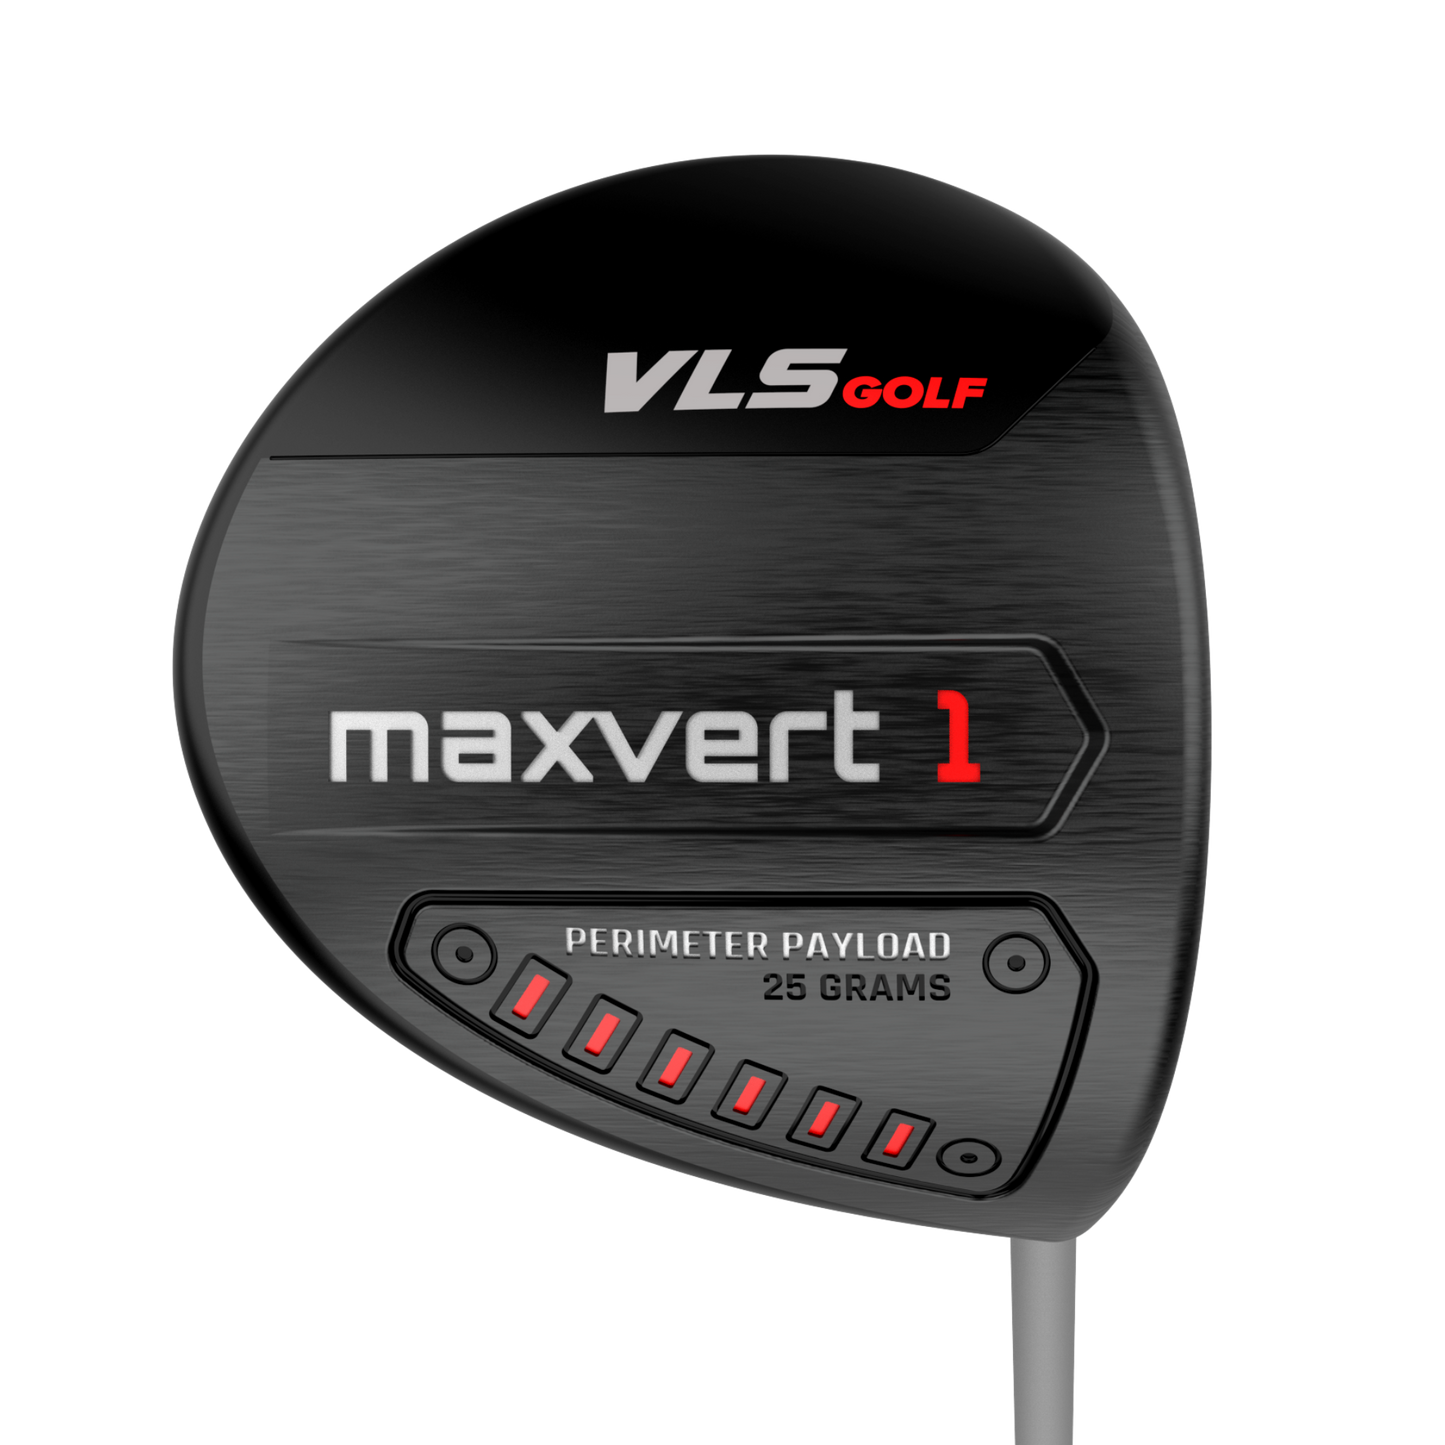 Certified Pre-Owned Maxvert 1 Drivers